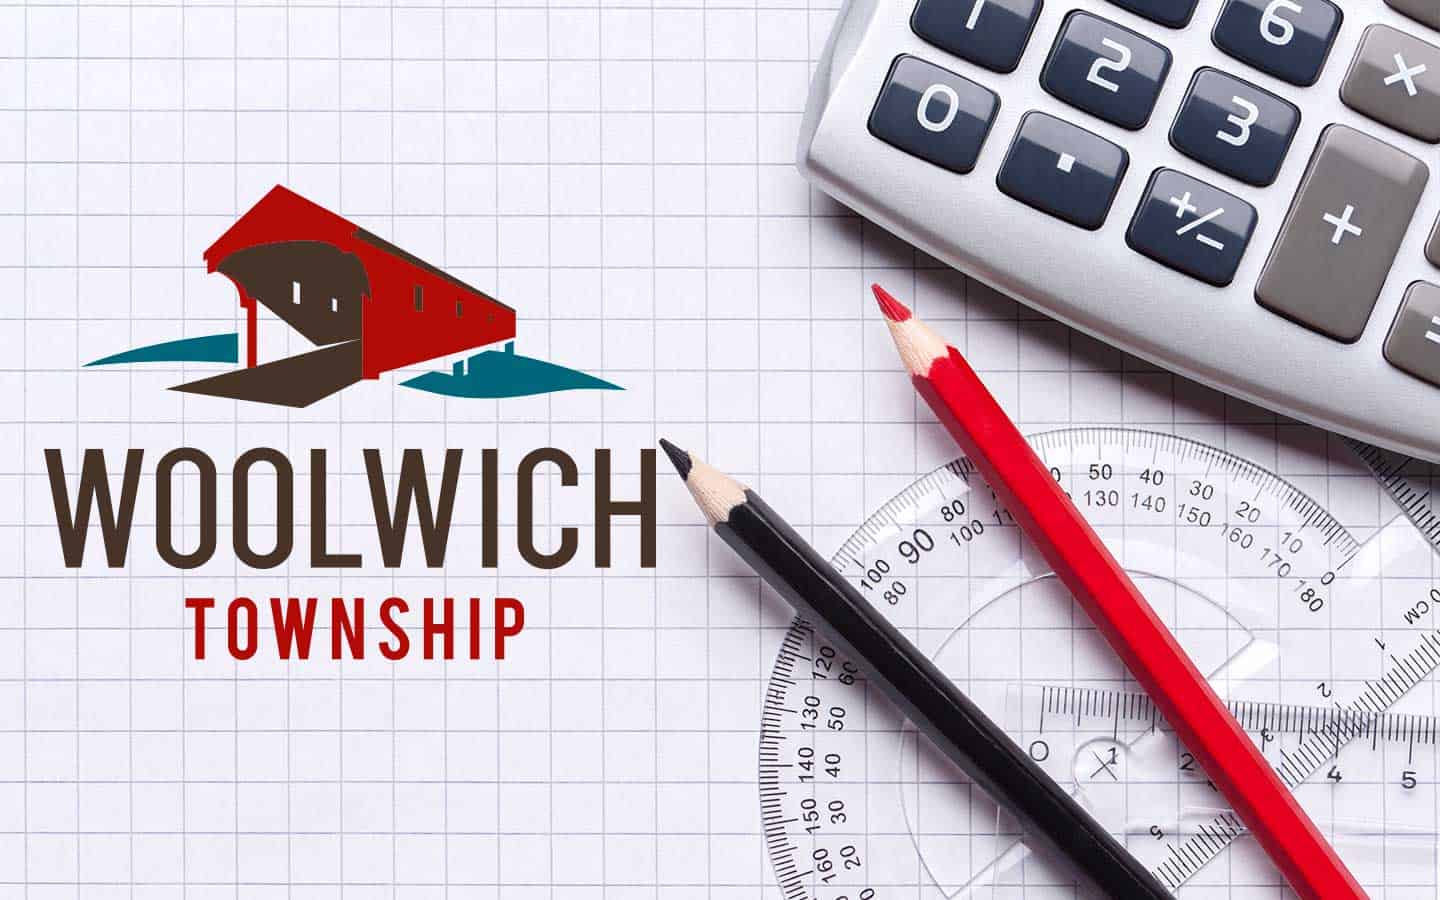 Woolwich to attach overdue water bills to property taxes  in bid to simplify collections process